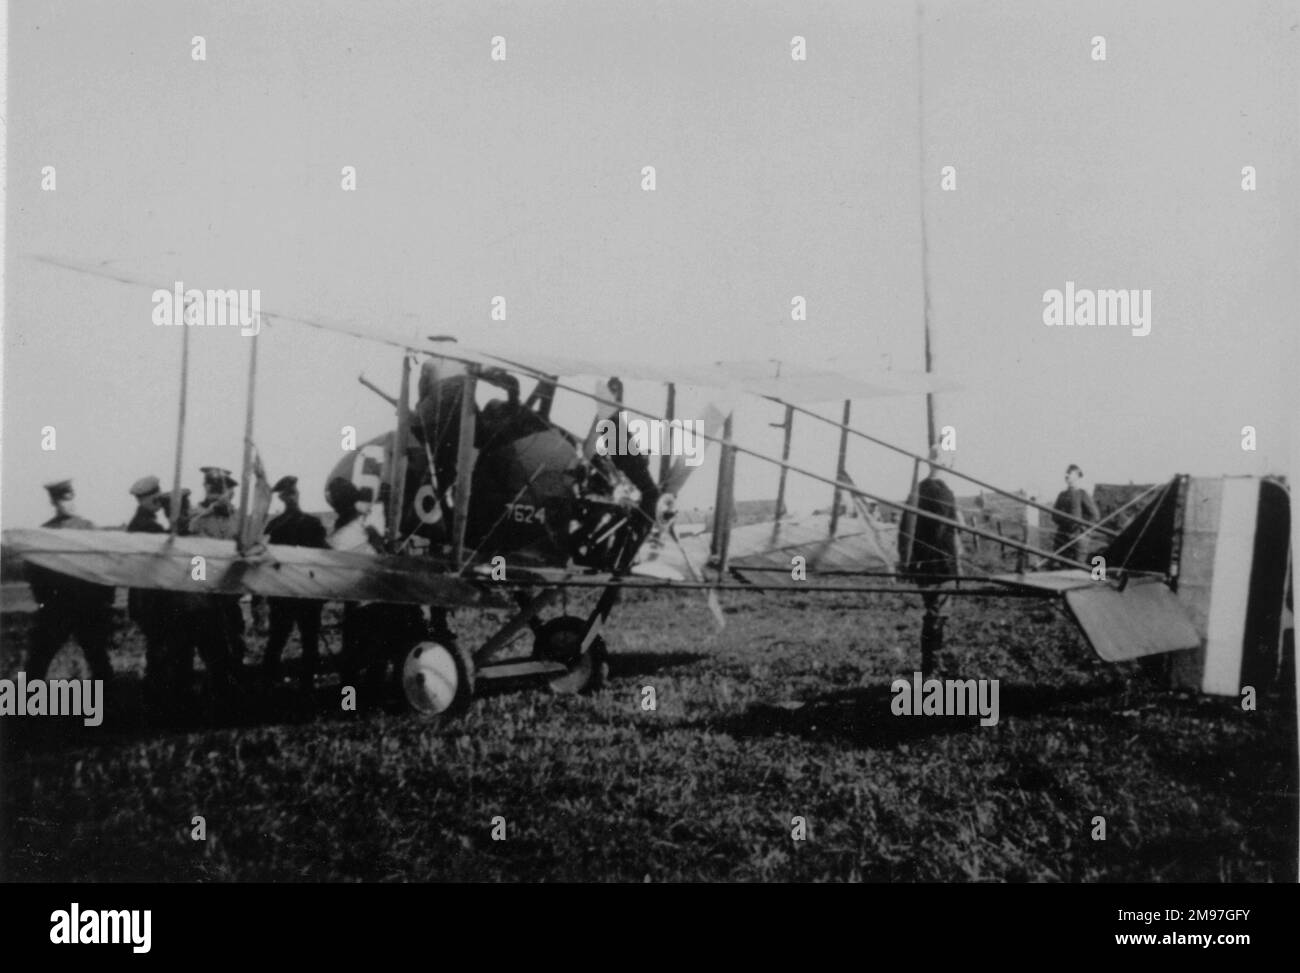 Royal Aircraft Factory FE 8 single-seat fighter plane, first flown on 8 November 1915.  It became obsolete by 1916. Seen here is serial no. 7624, being inspected by its German captors near Provin on 9 November 1916. Stock Photo